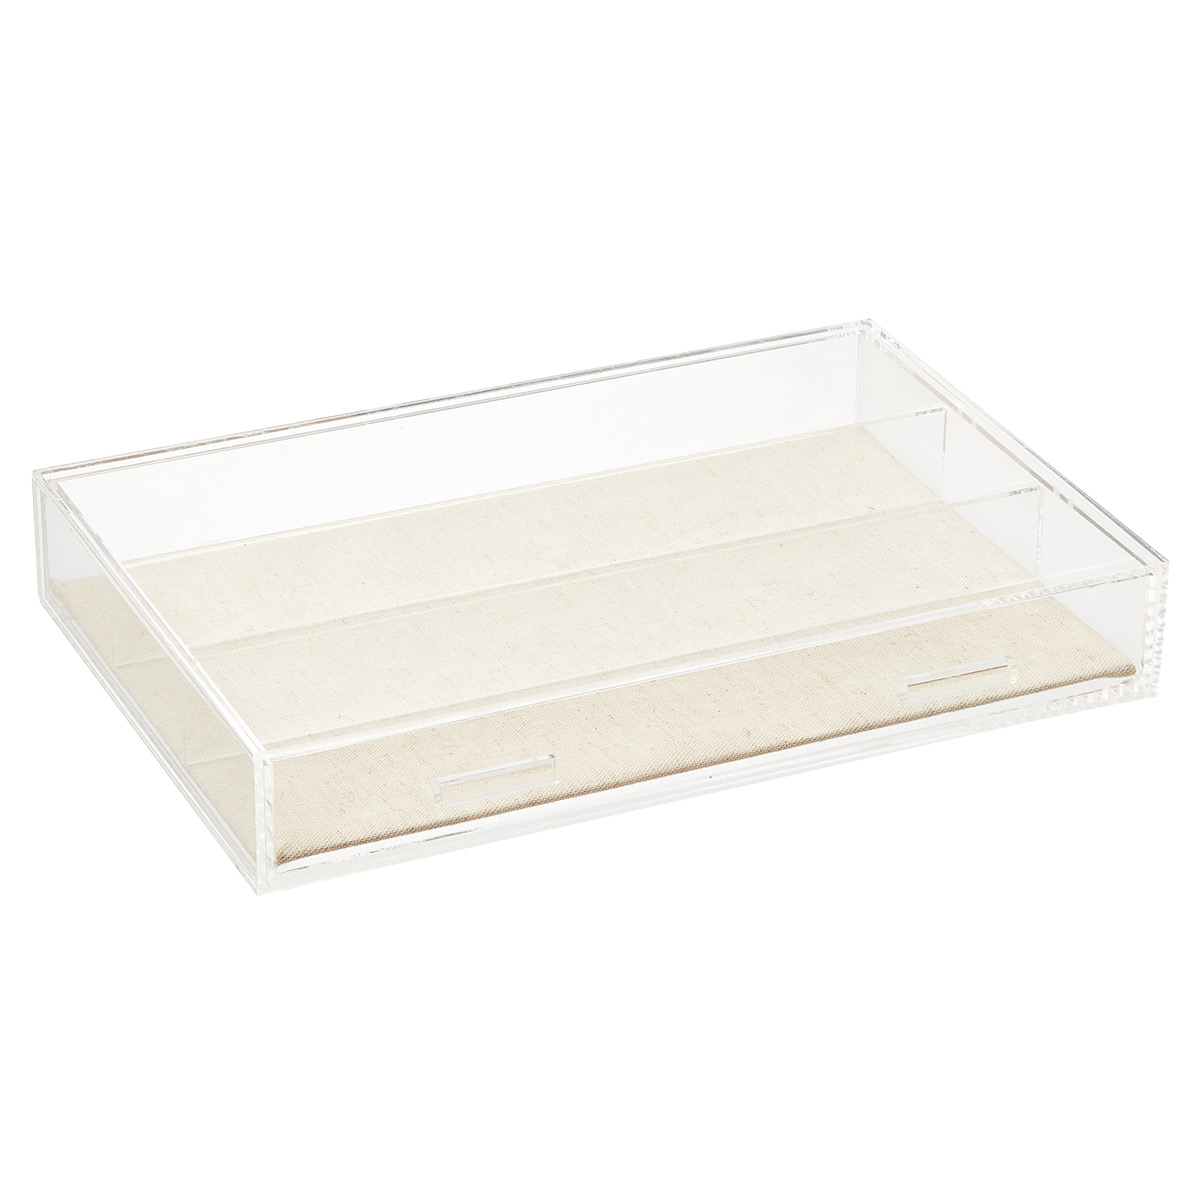 https://www.containerstore.com/catalogimages/391653/10081574-3-compartment-wide-acrylic-.jpg